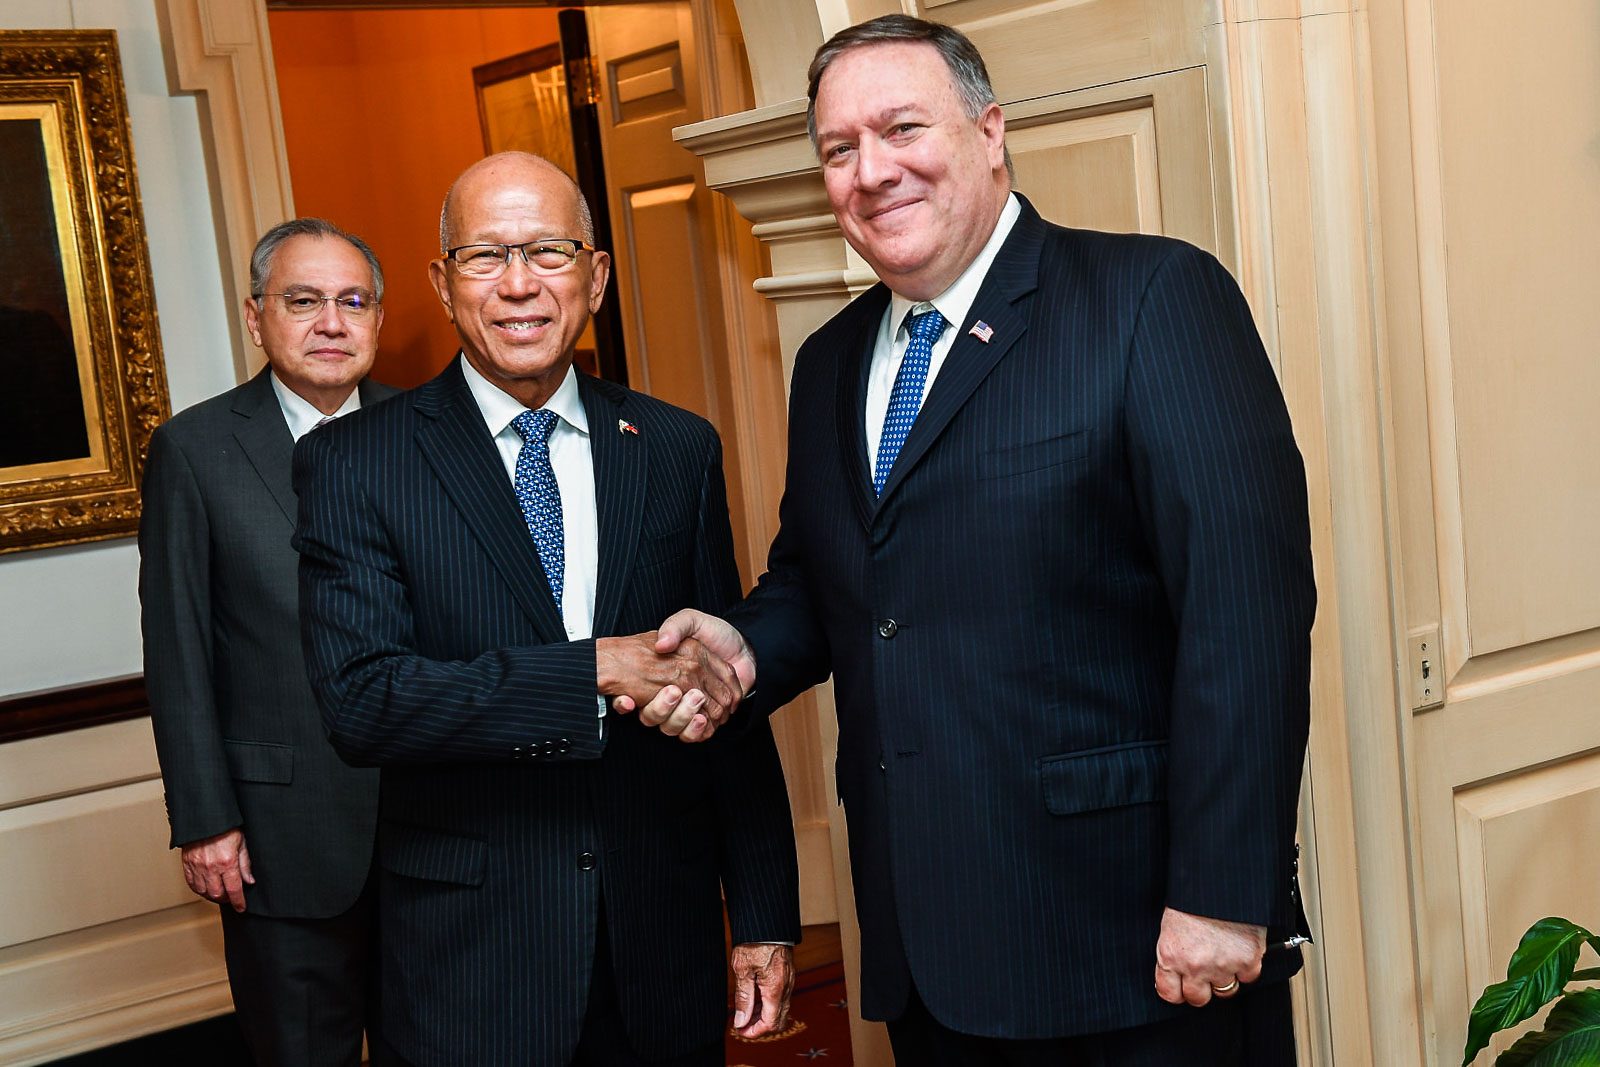 PH-US TIES. US Secretary of State Mike Pompeo meets with Philippine Secretary of National Defense Delfin Lorenzana at the Department of State, September 19, 2018. Photo by Michael Gross/State Department 